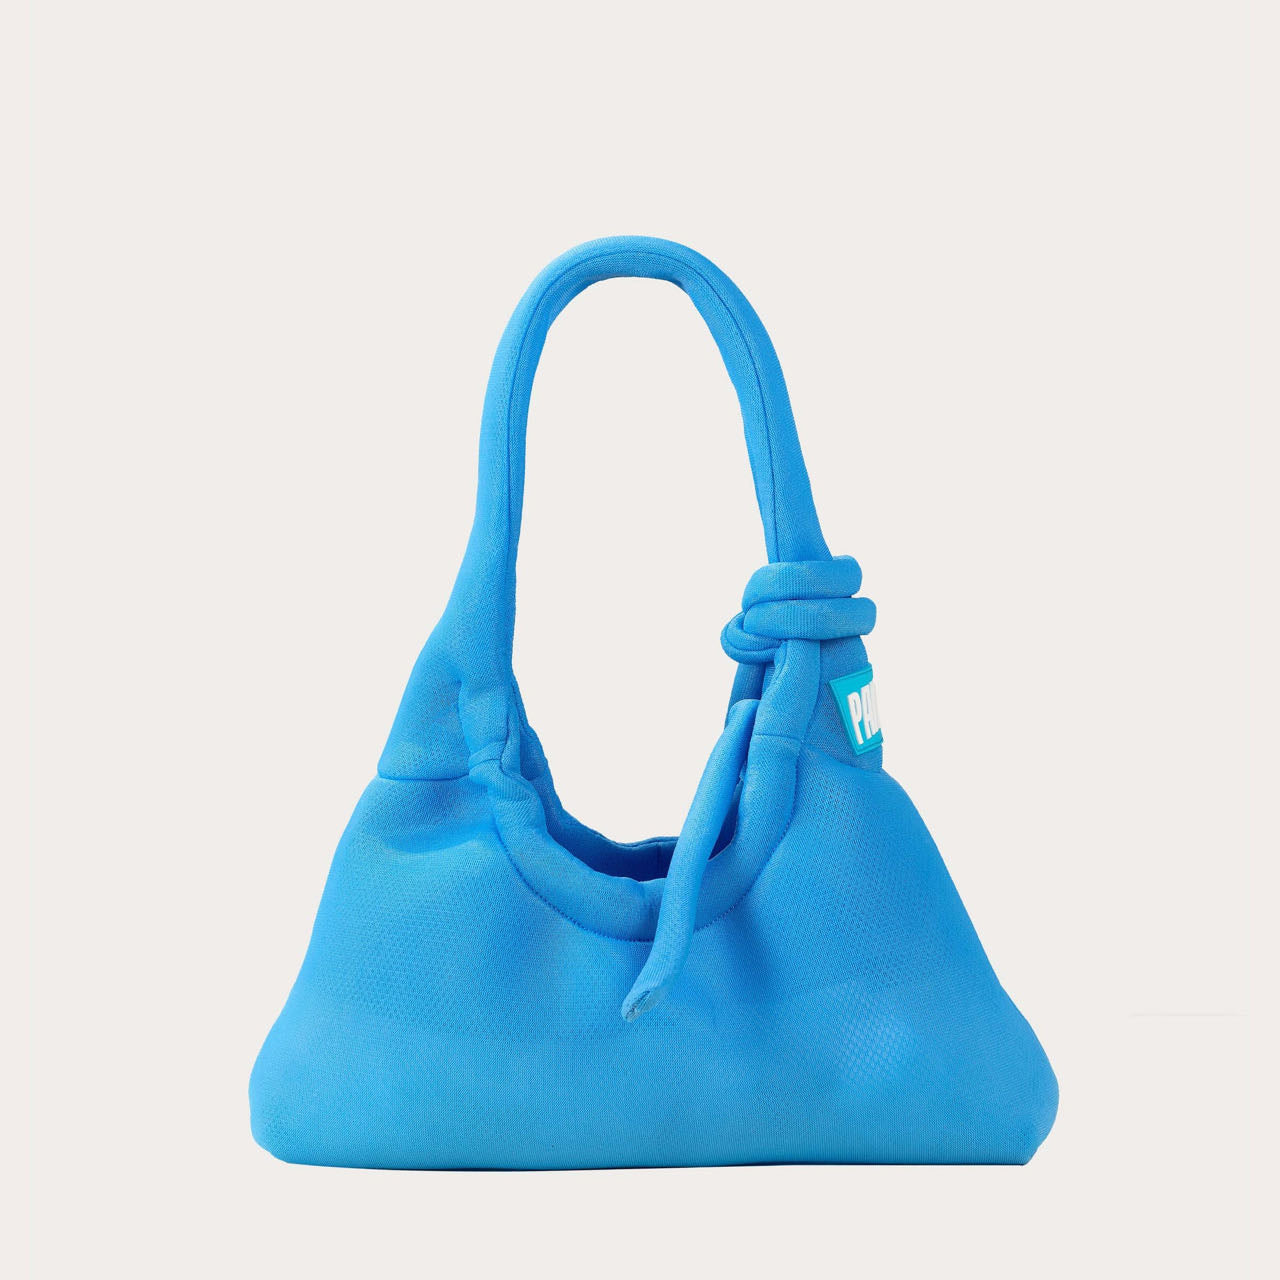 Everyday Carry Bag Small in Blue